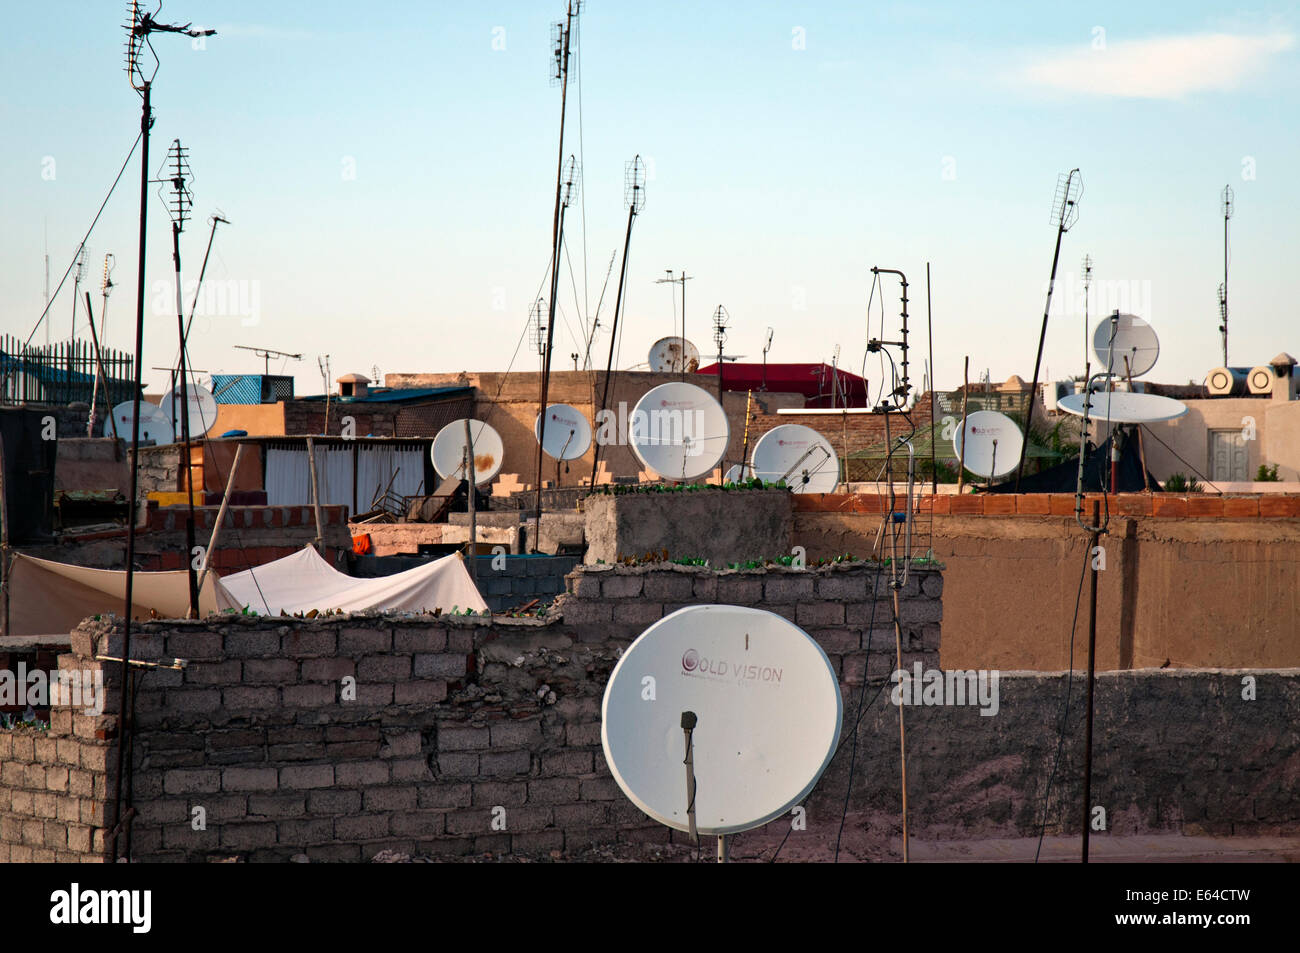 Satellite dishes and antennae on the rooftop of houses in Marrakesh, Morocco, North Africa Stock Photo